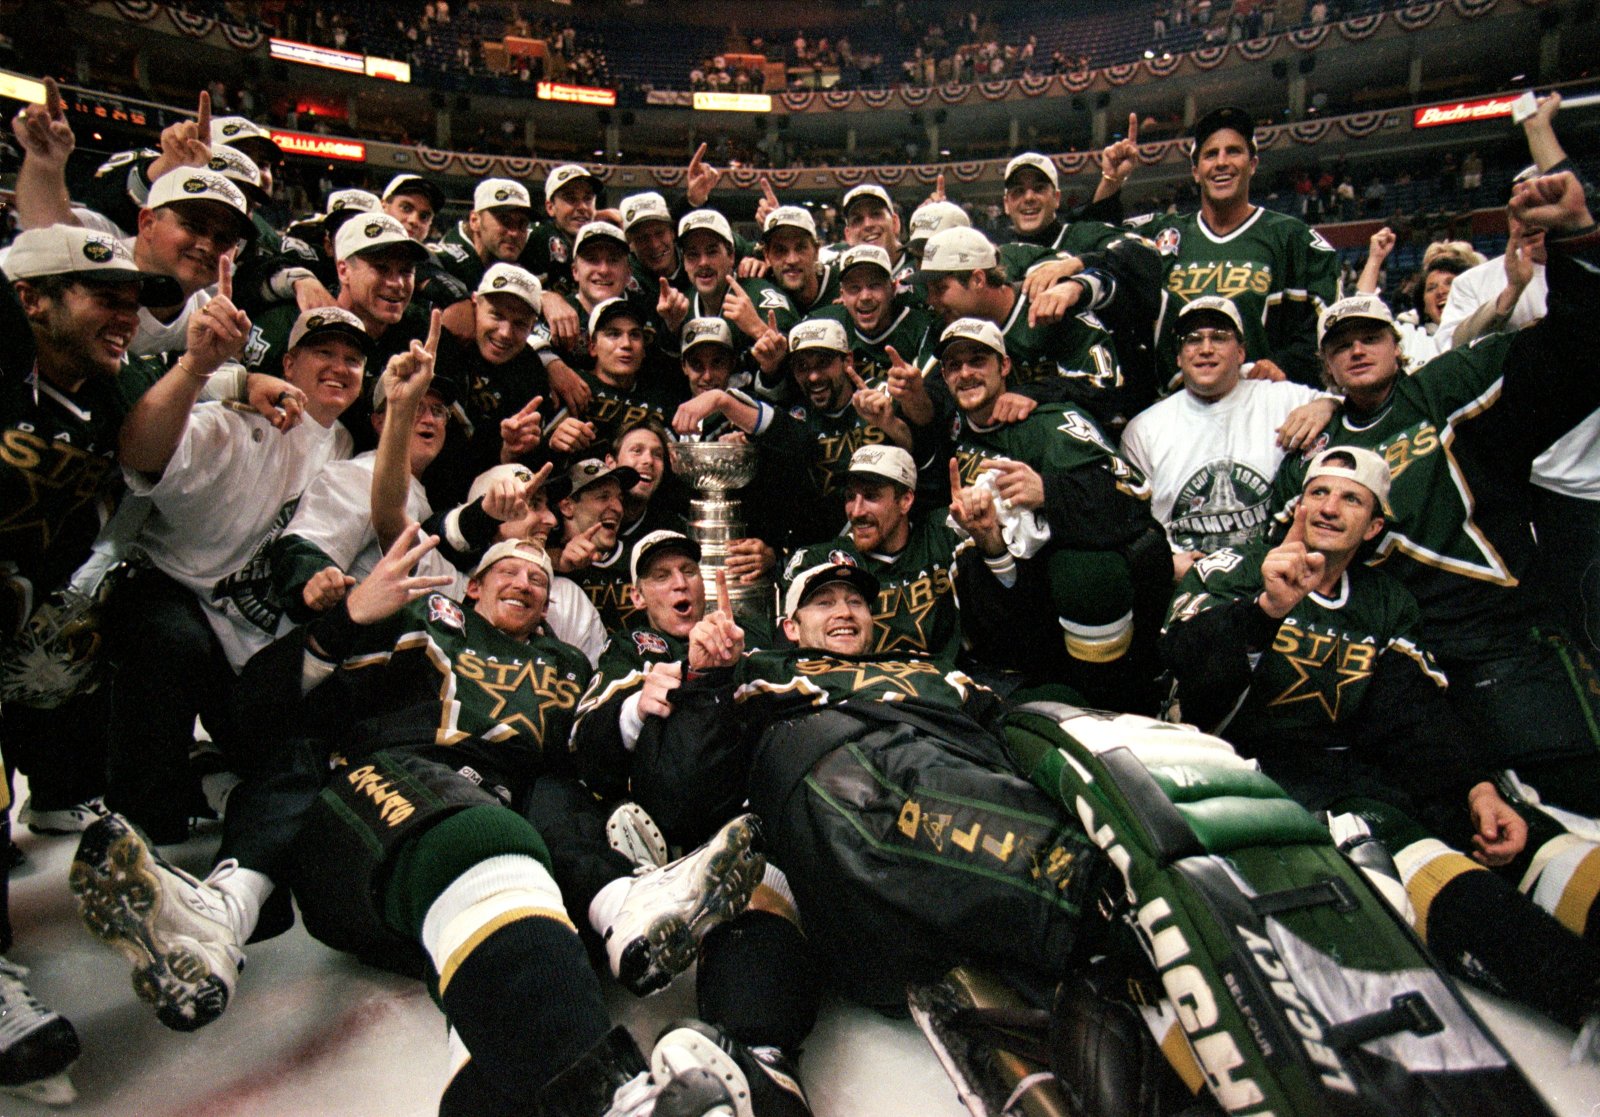 Buffalo Sabres: Reliving the 1999 Stanley Cup Final